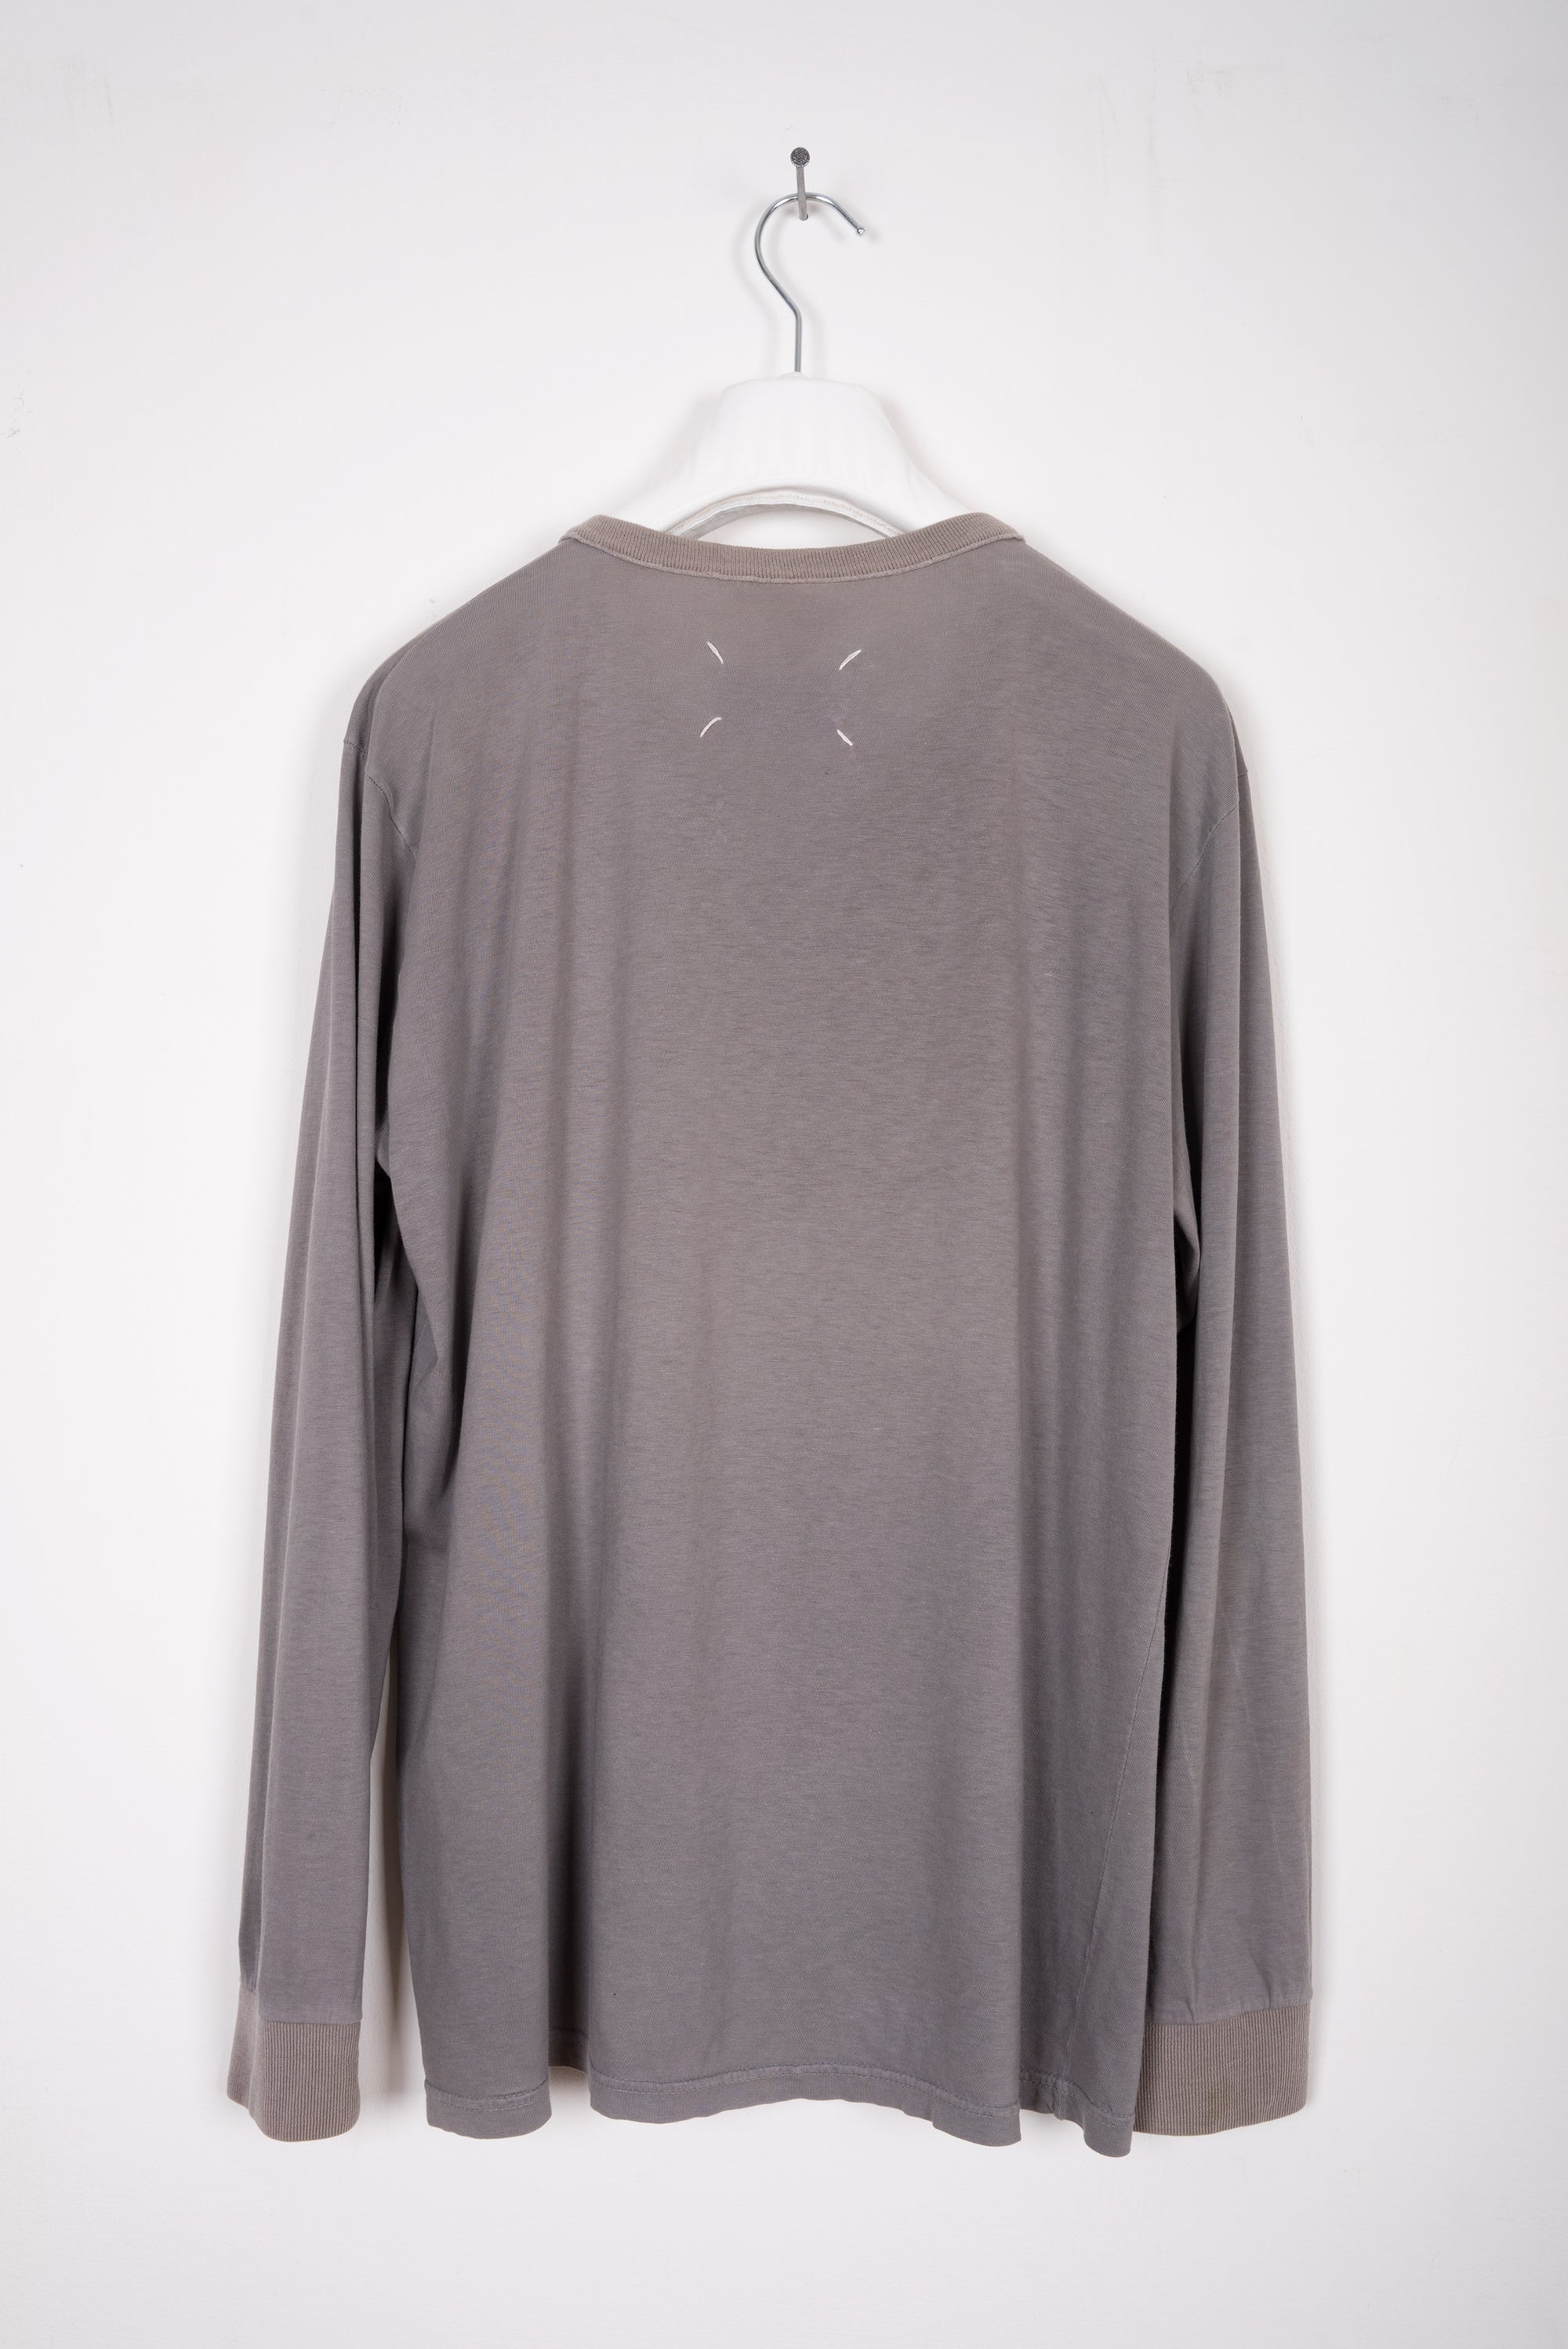 2001 S/S LONG-SLEEVE V-NECK TOP WITH KNITTED RIBBING BY MISS DEANNA